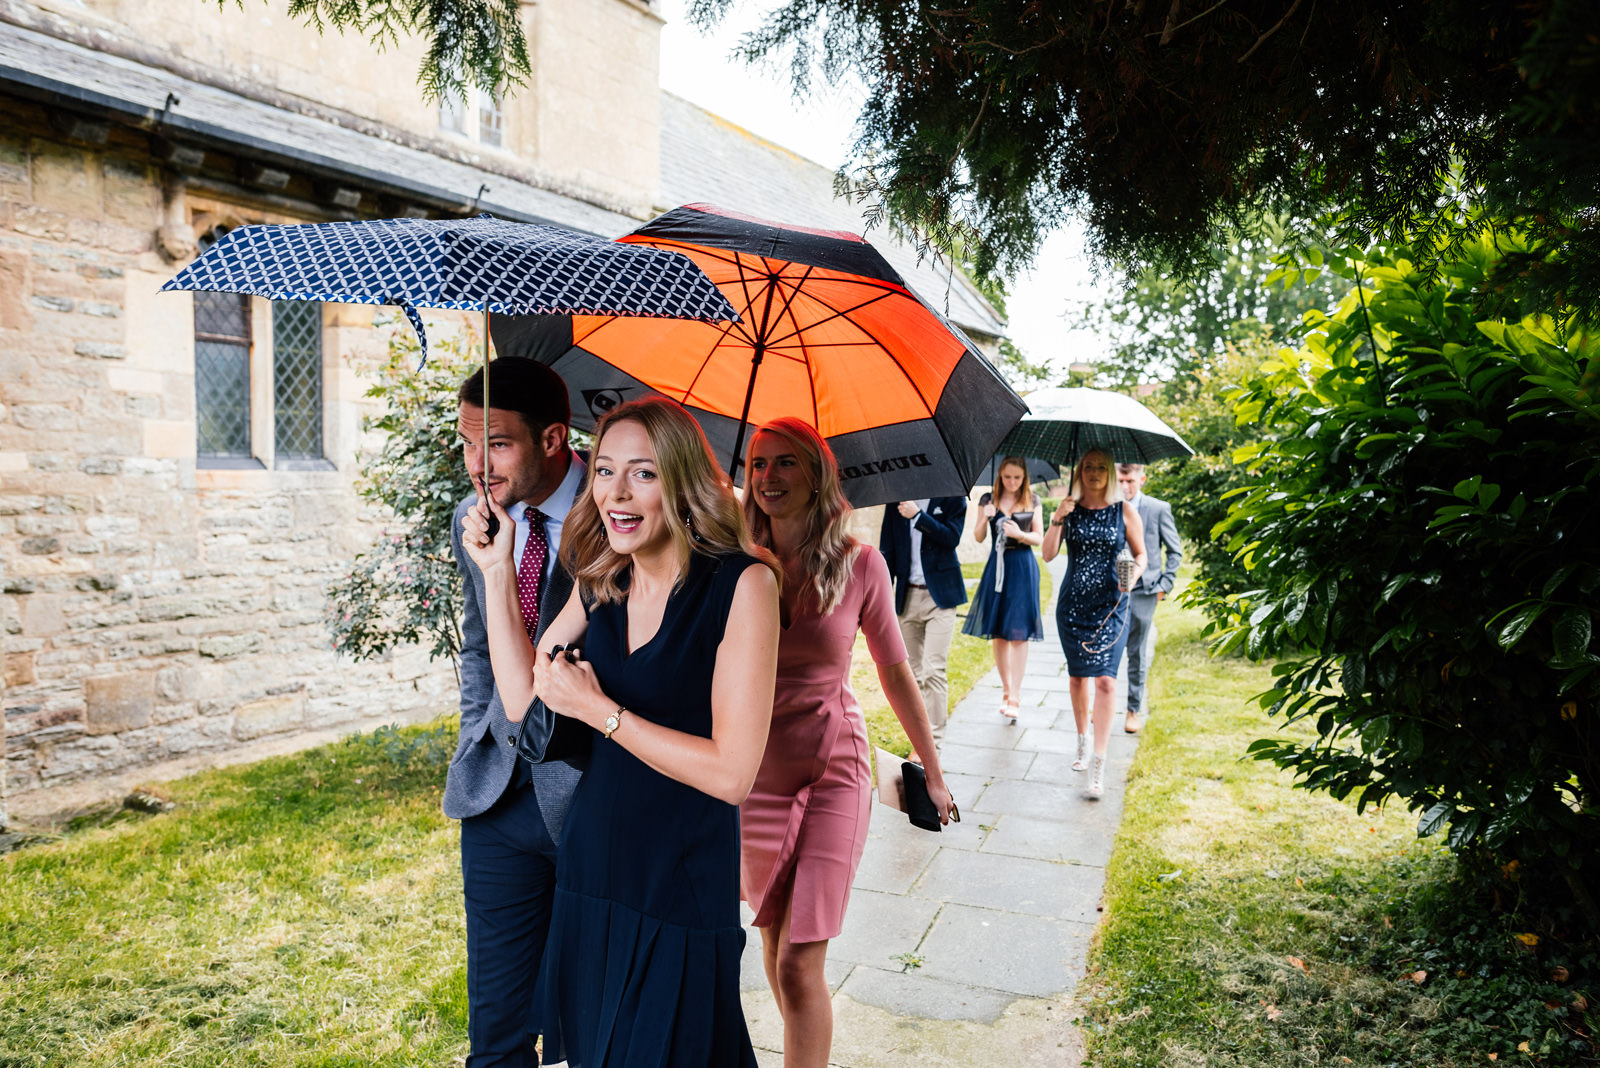 guests arriving in the rain